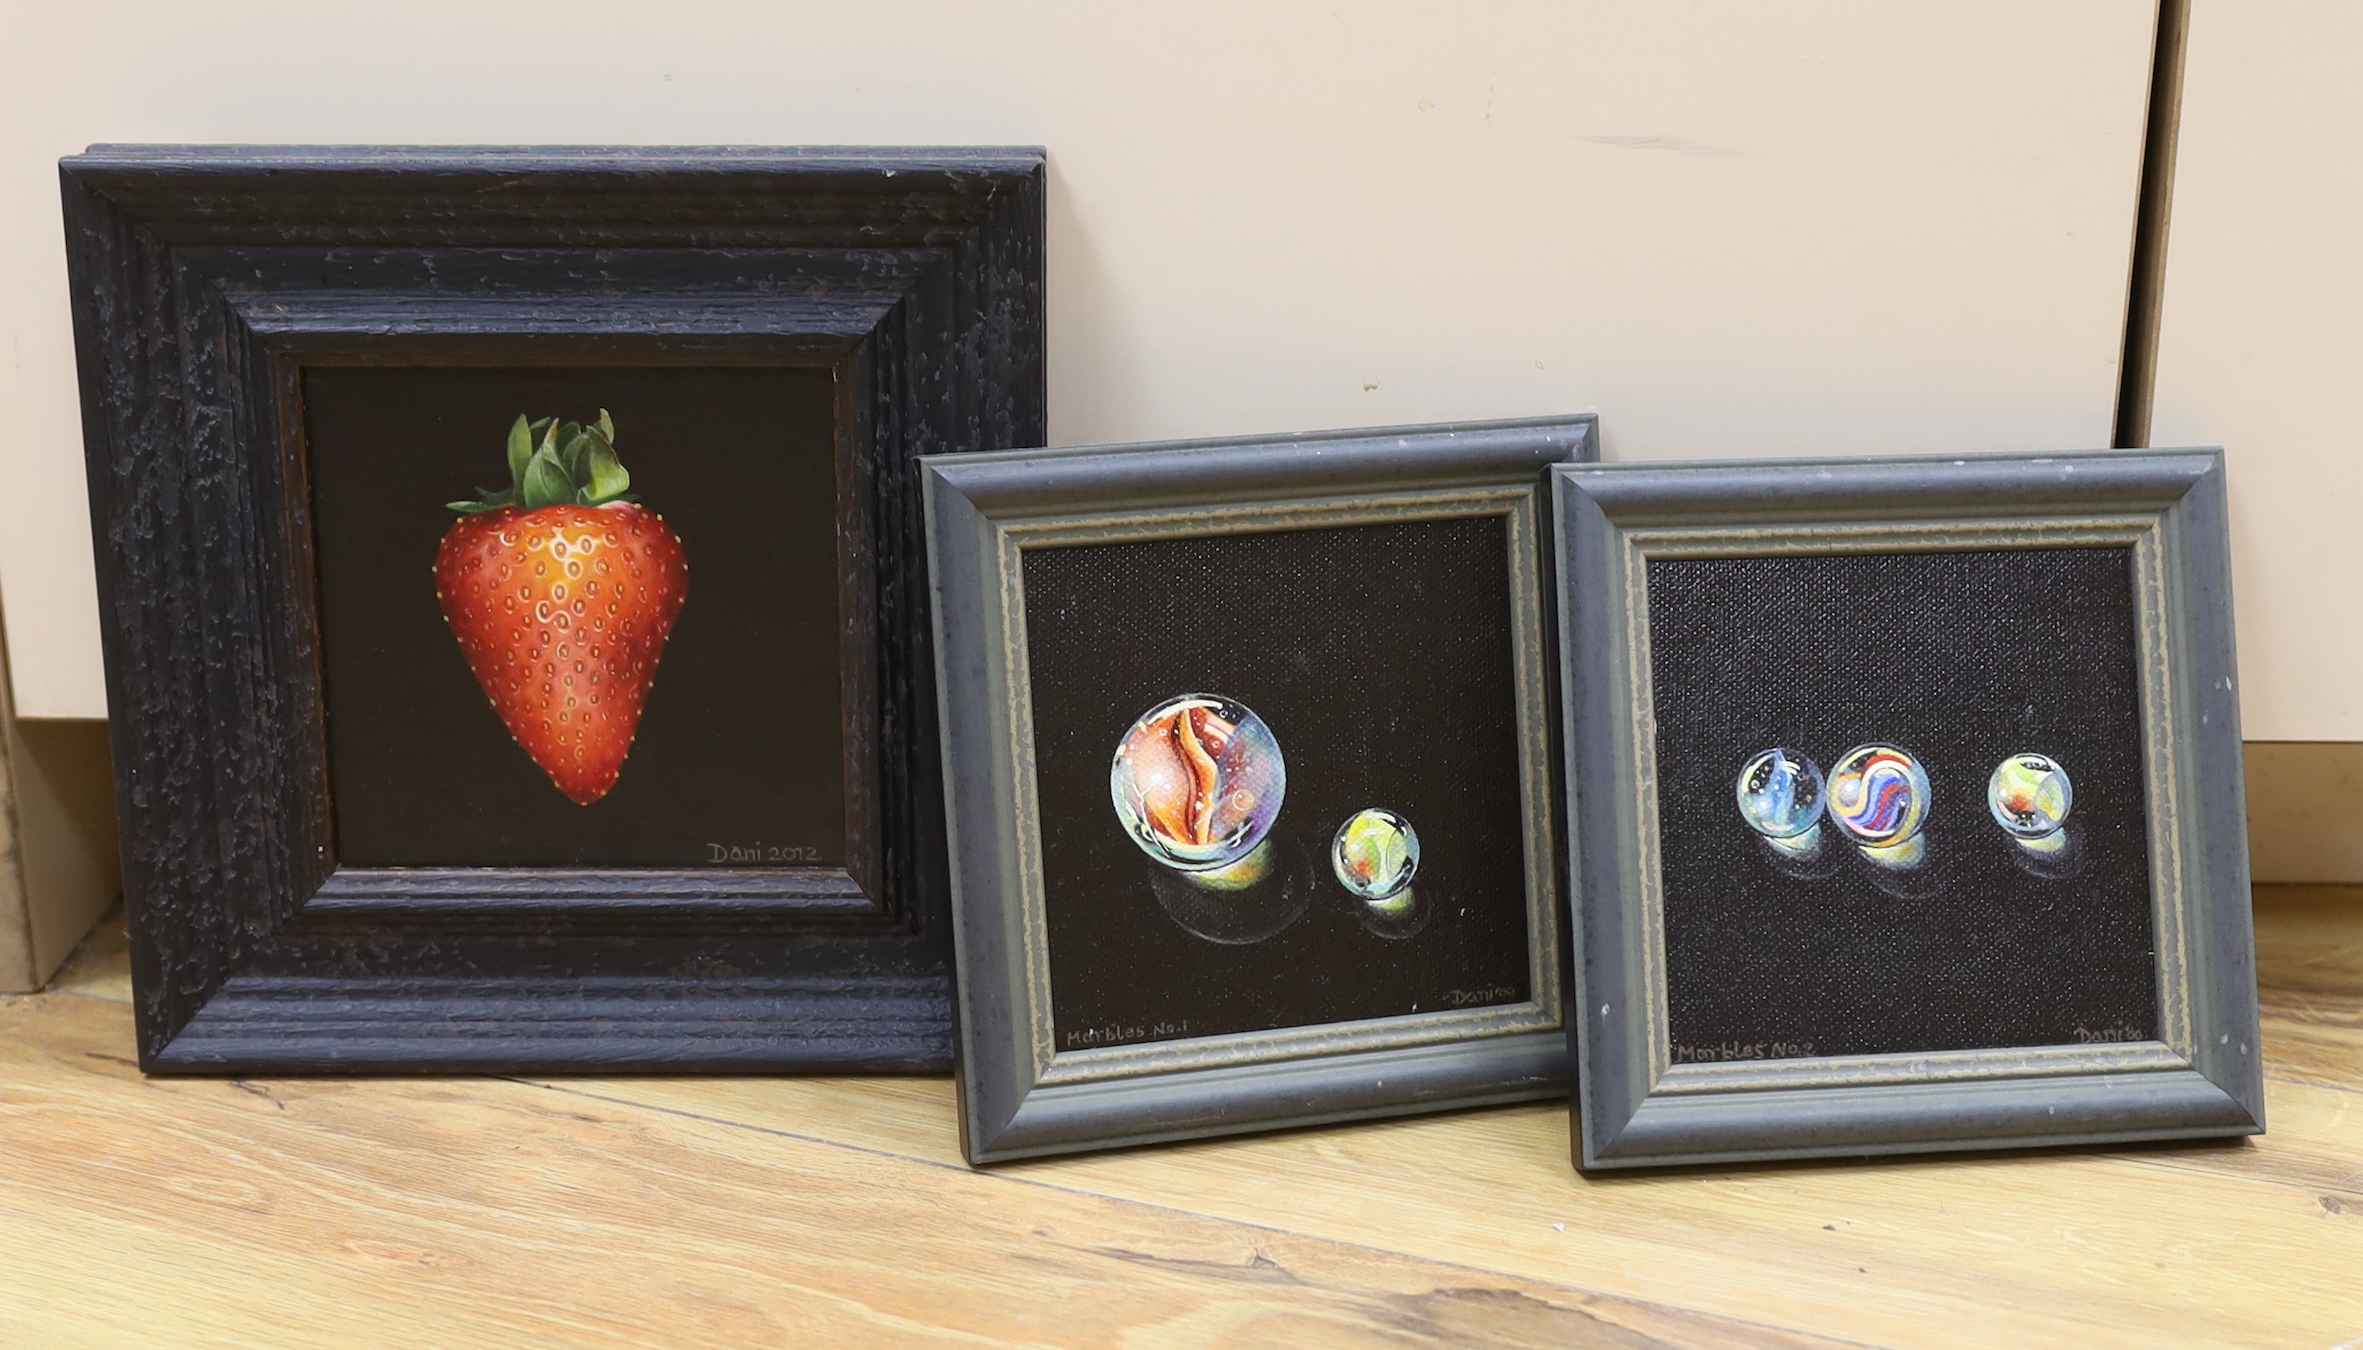 Dani Humberstone (contemporary) three oils on canvas board, Still lifes, 'Big red strawberry', 'Marbles No1' and 'Marbles No2', each signed and dated, largest 12 x 11cm